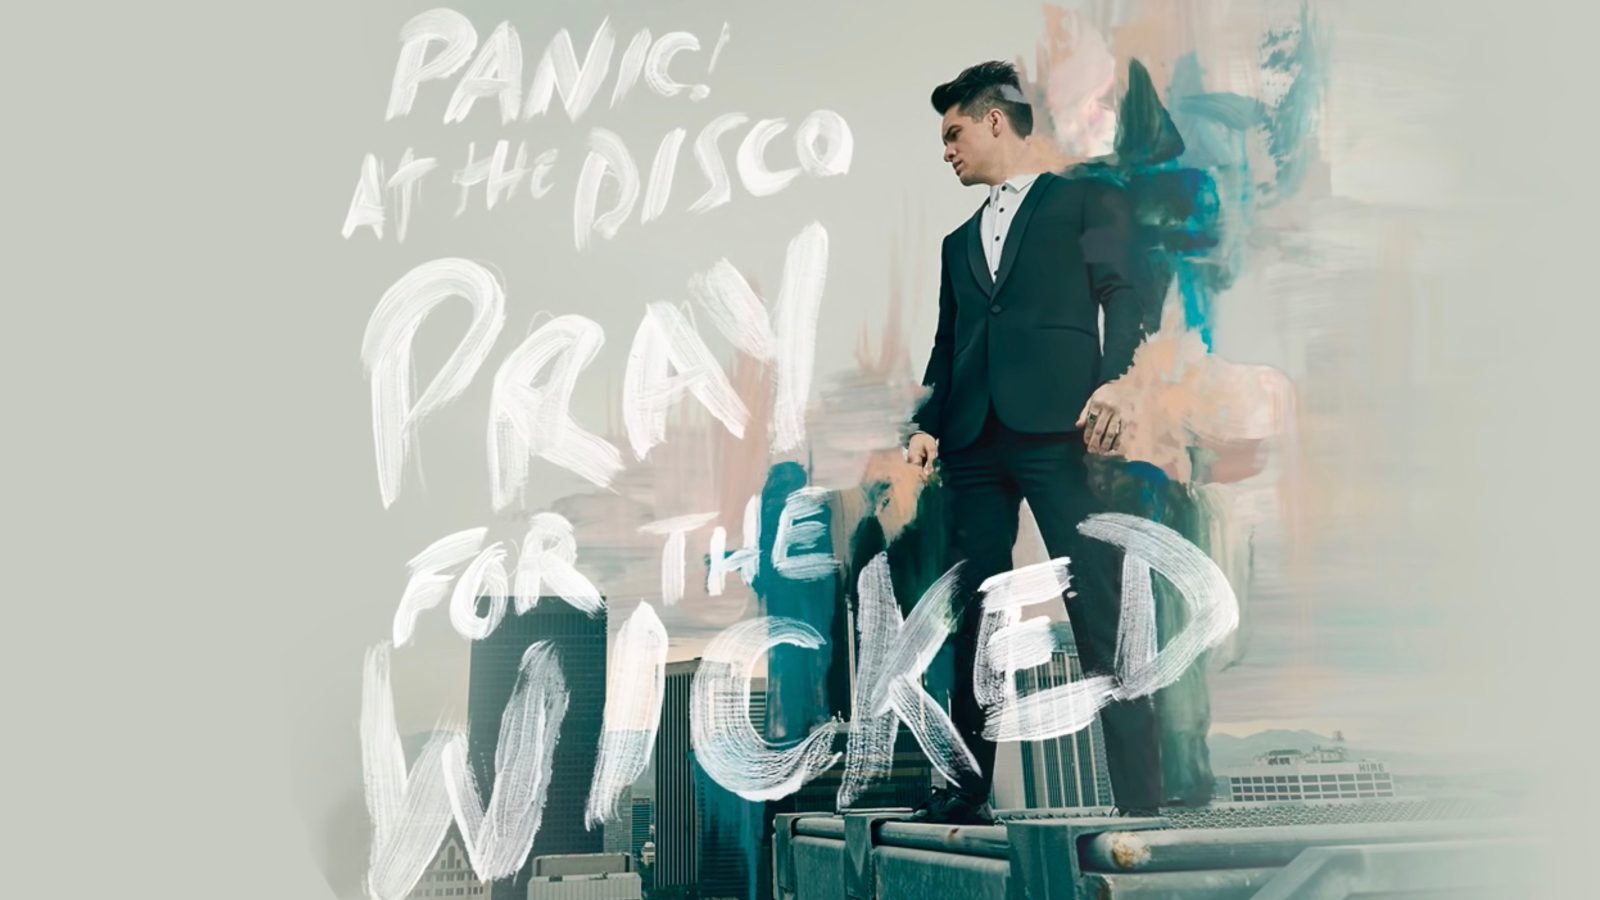 Apple S 2018 Wwdc Bash To Feature Concert By Panic At The Disco